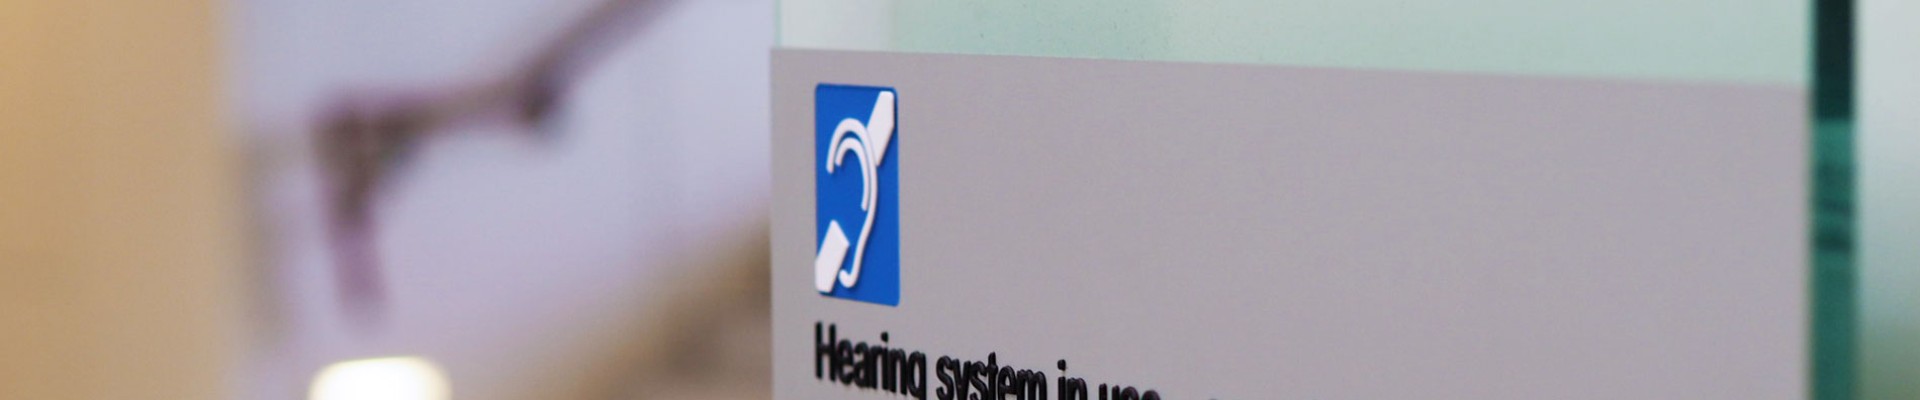 Hearing system signage at the State Library Photo by Emma Winch